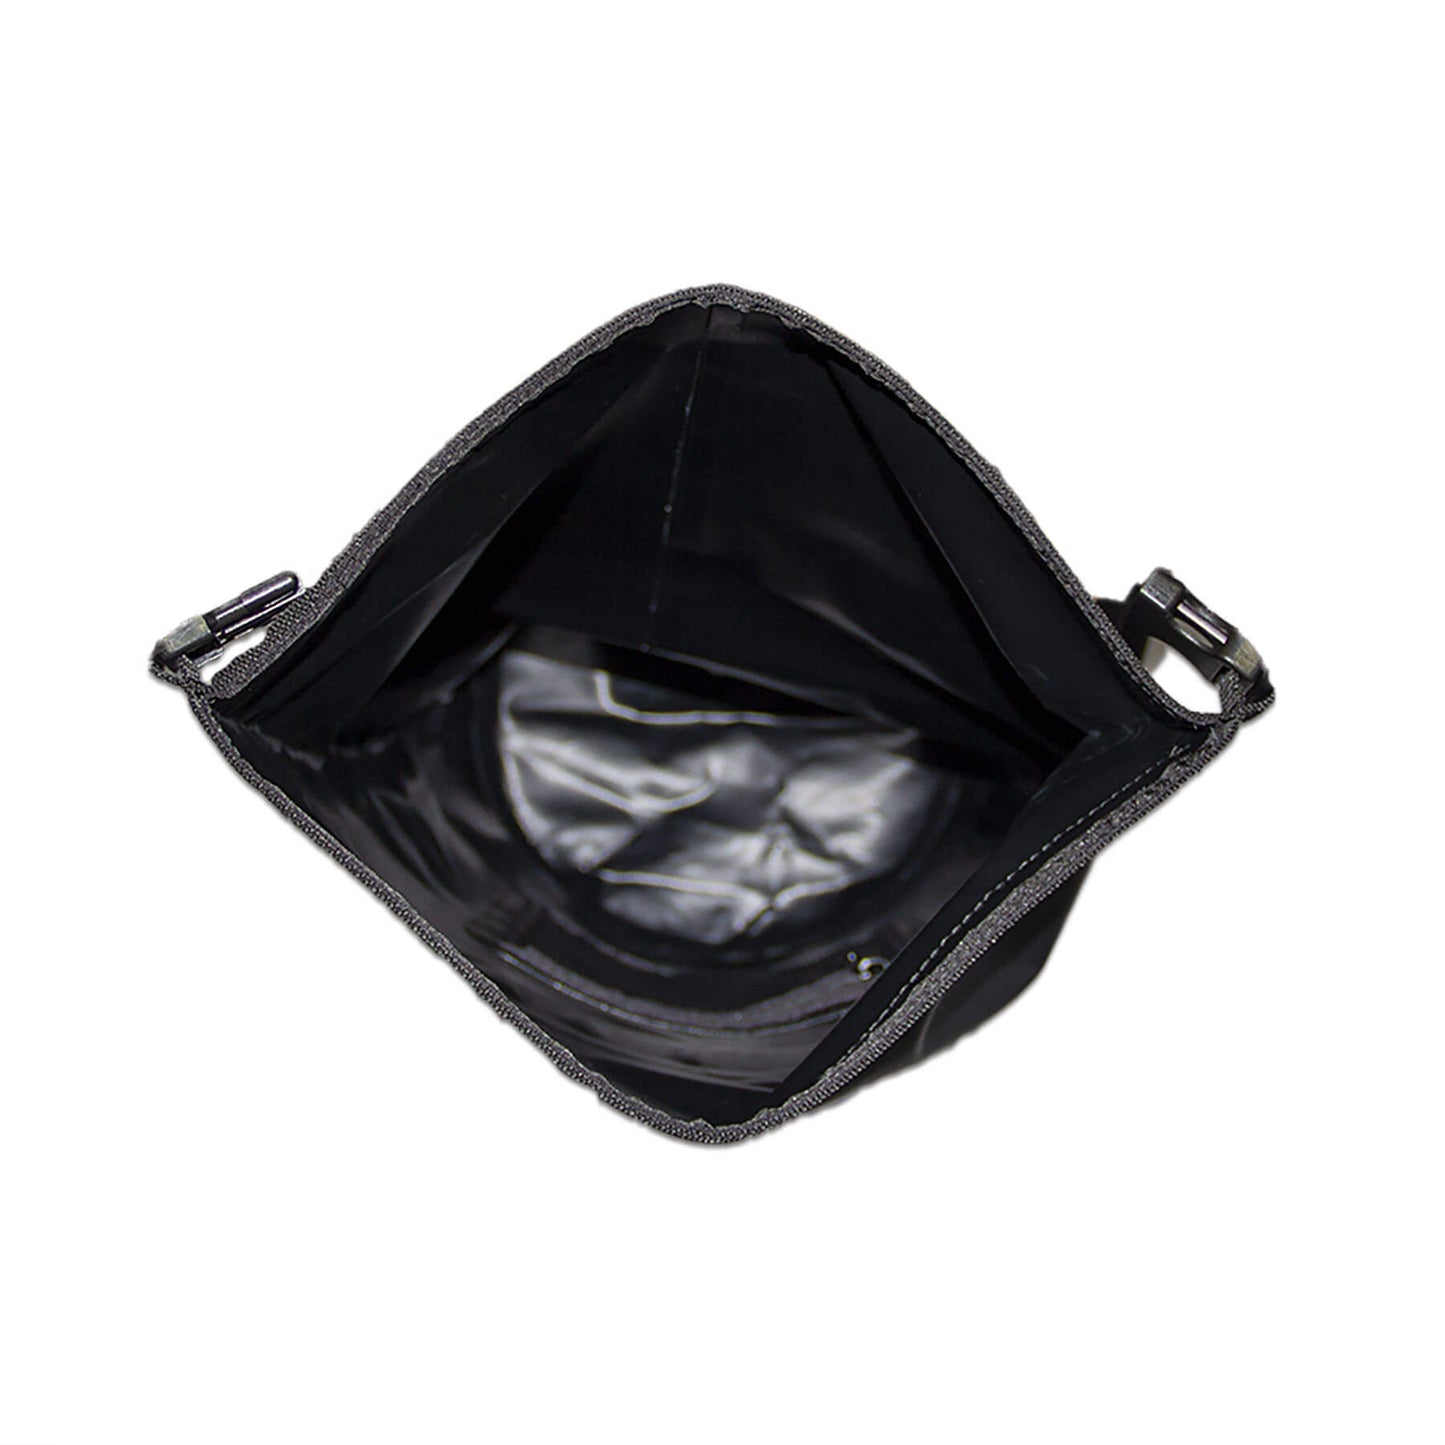 waterproof dry bag 20 litres with detachable comfort straps, D rings and handle in black inside view